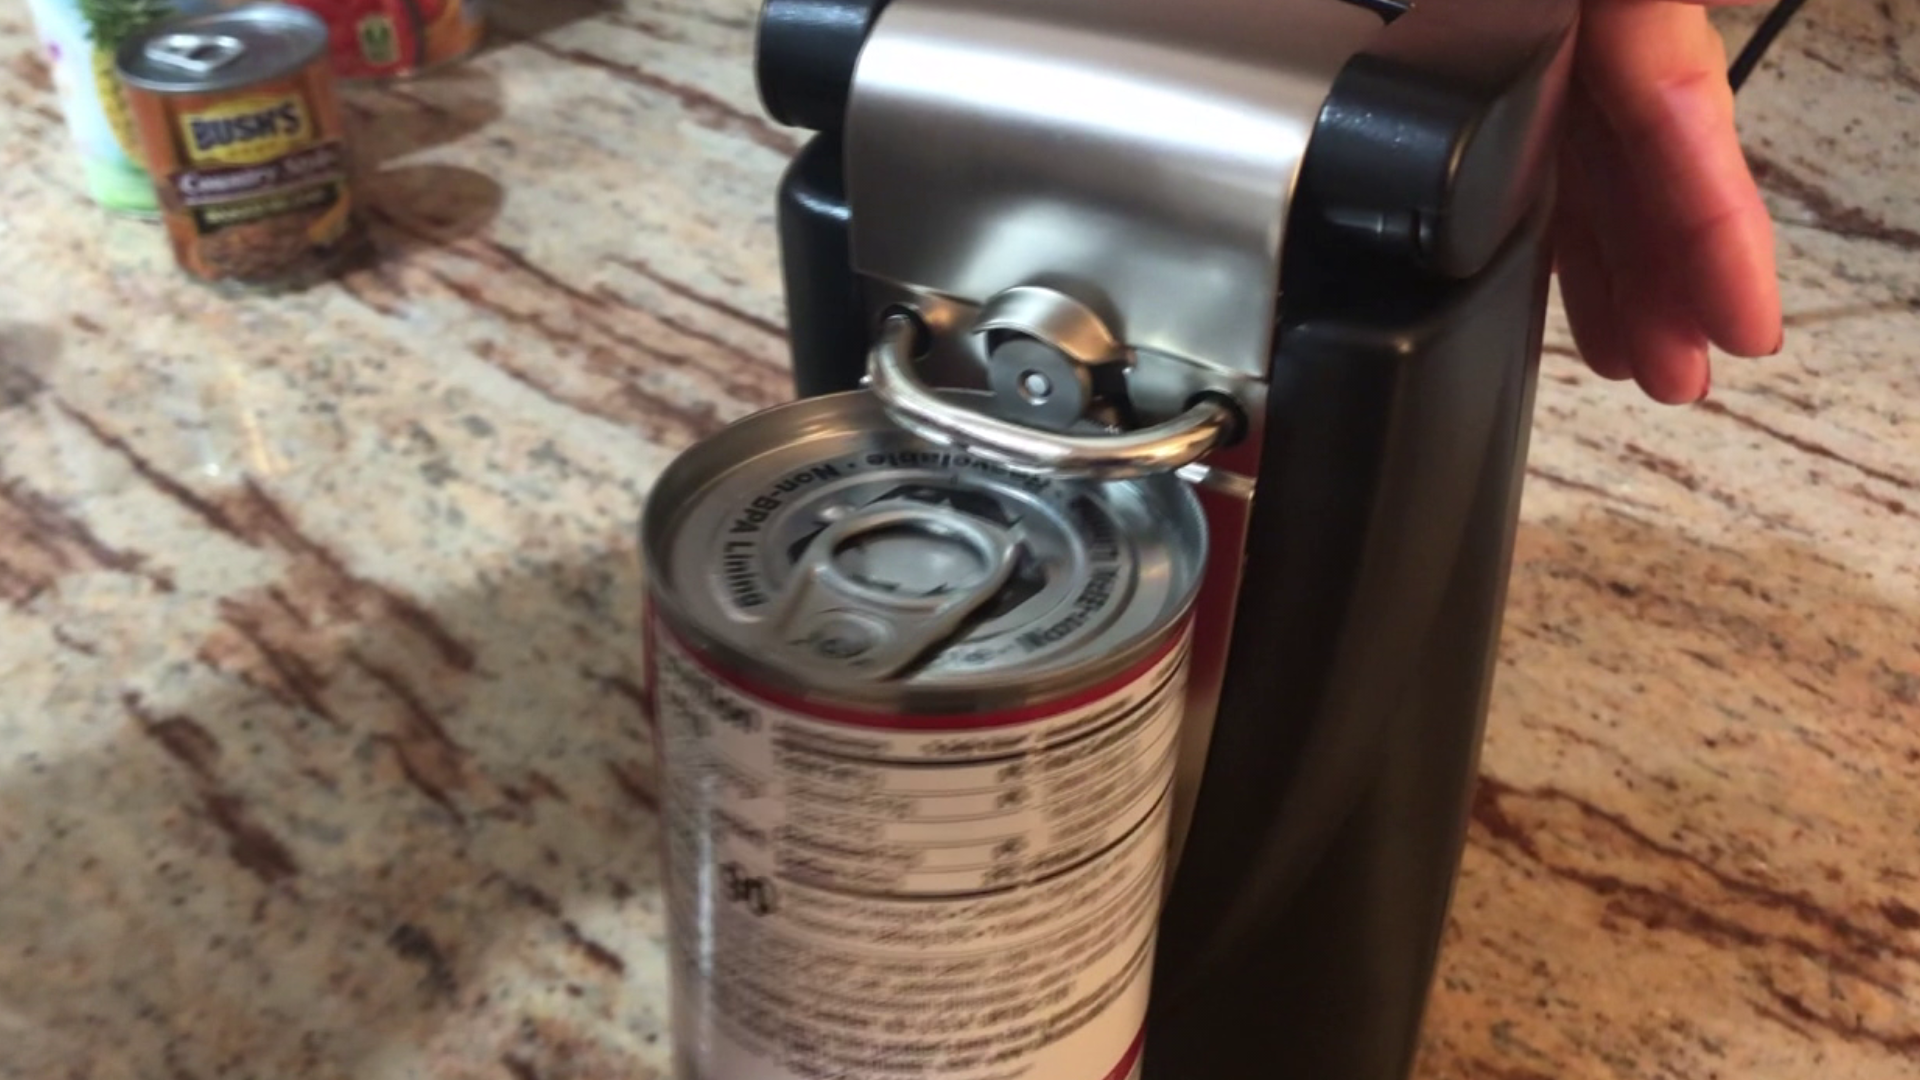 The makers claim the Safety Can Express will open your cans with smooth edges and will work on any size can.